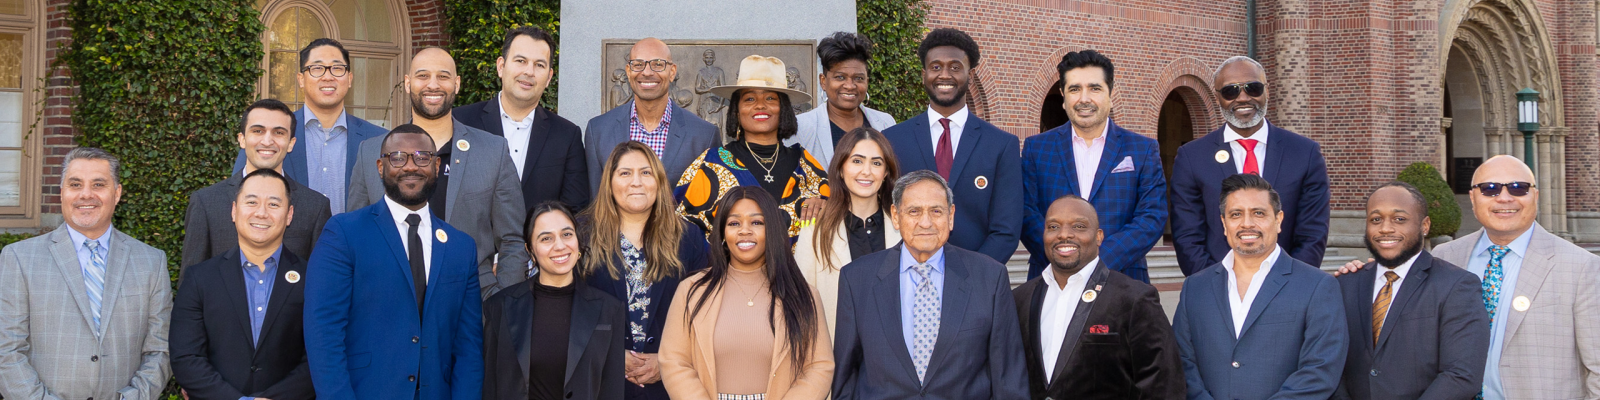 Photo: Ross Winter 2024 Session class. A group of about 25 people stand in front of the Tommy Trojan statue on USC campus. They are all wearing professional dress and comprise a diverse make up of genders and ethnicities including Black, Latino, Asian, White, and more. 